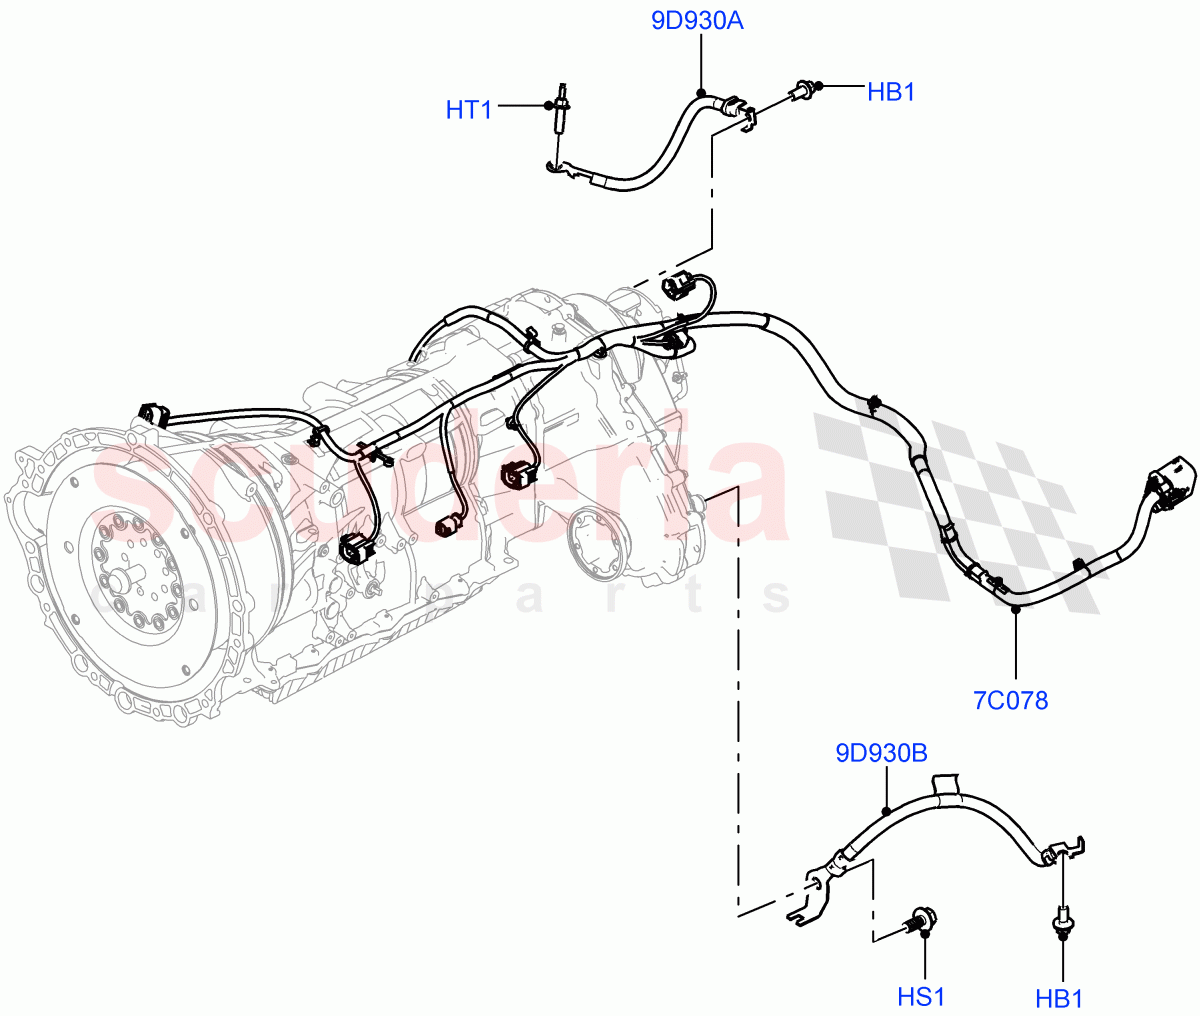 Transmission Harness(Solihull Plant Build)((V)FROMHA000001) of Land Rover Land Rover Discovery 5 (2017+) [3.0 DOHC GDI SC V6 Petrol]